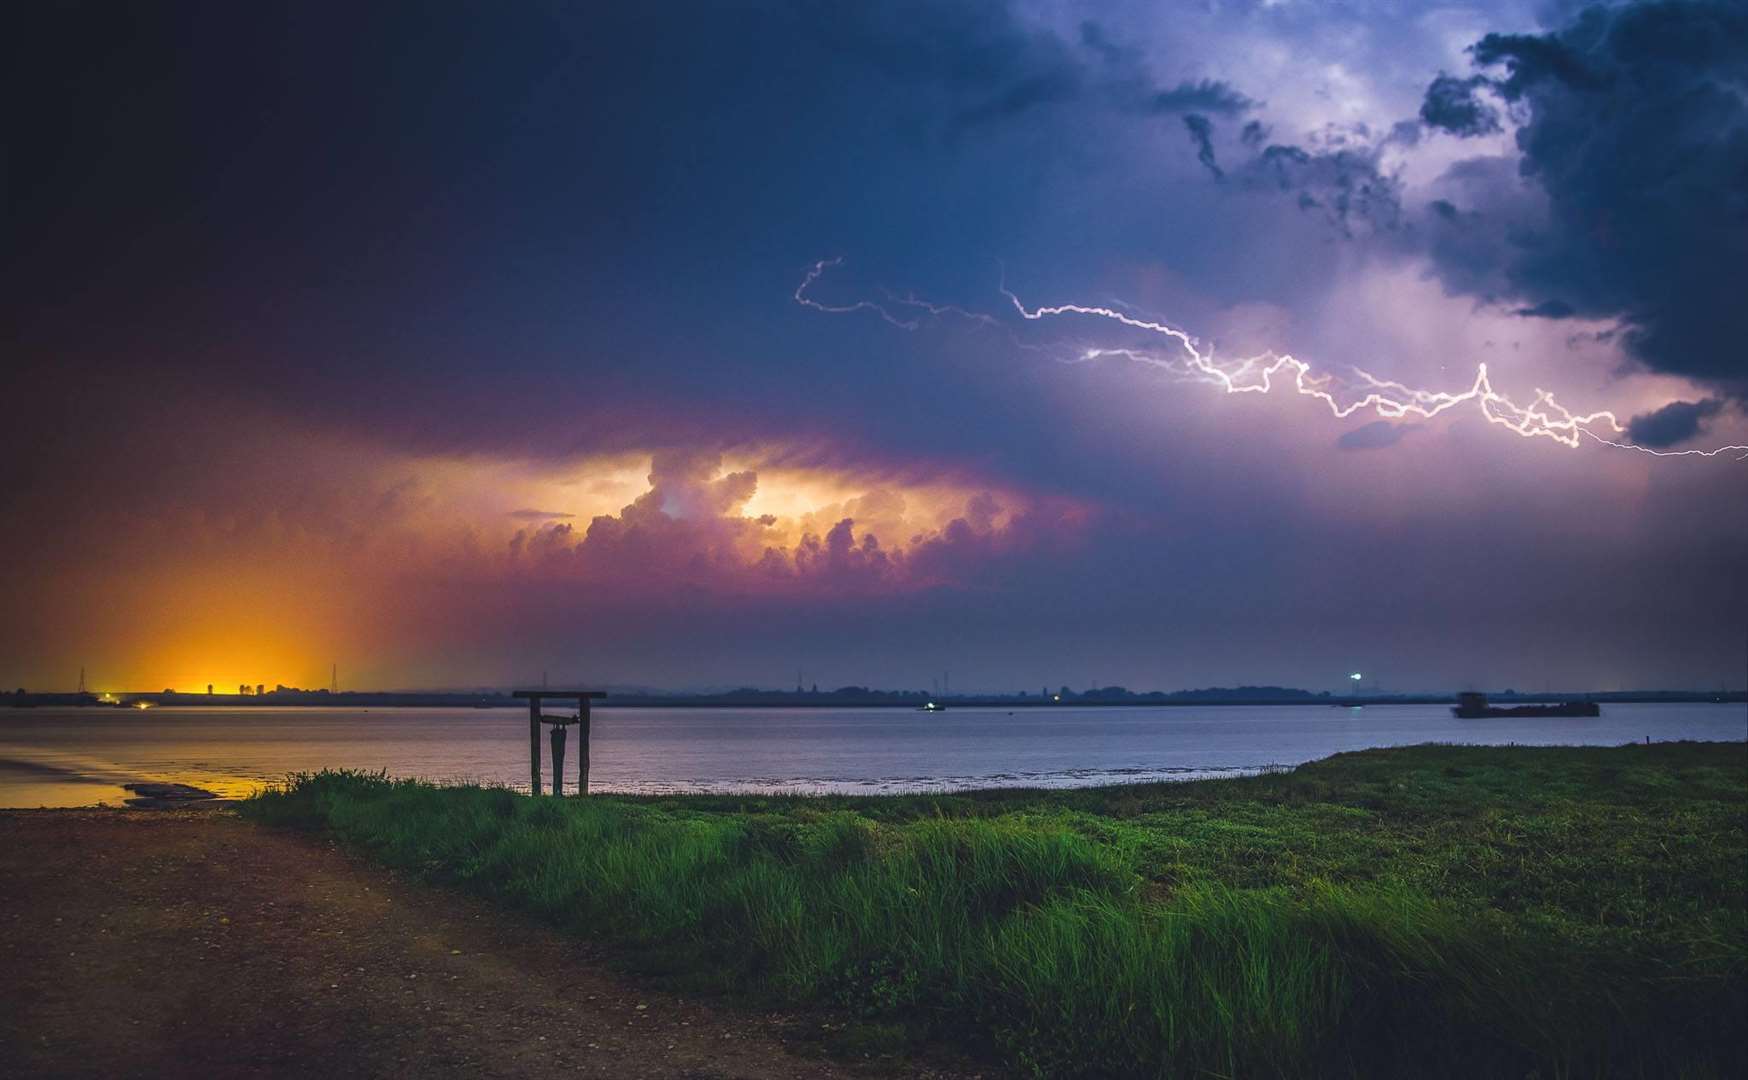 Stormy weather and lightning captured in the skies over Harty on the Isle of Sheppey by Julius Matikas. Picture: matikas-photo.com